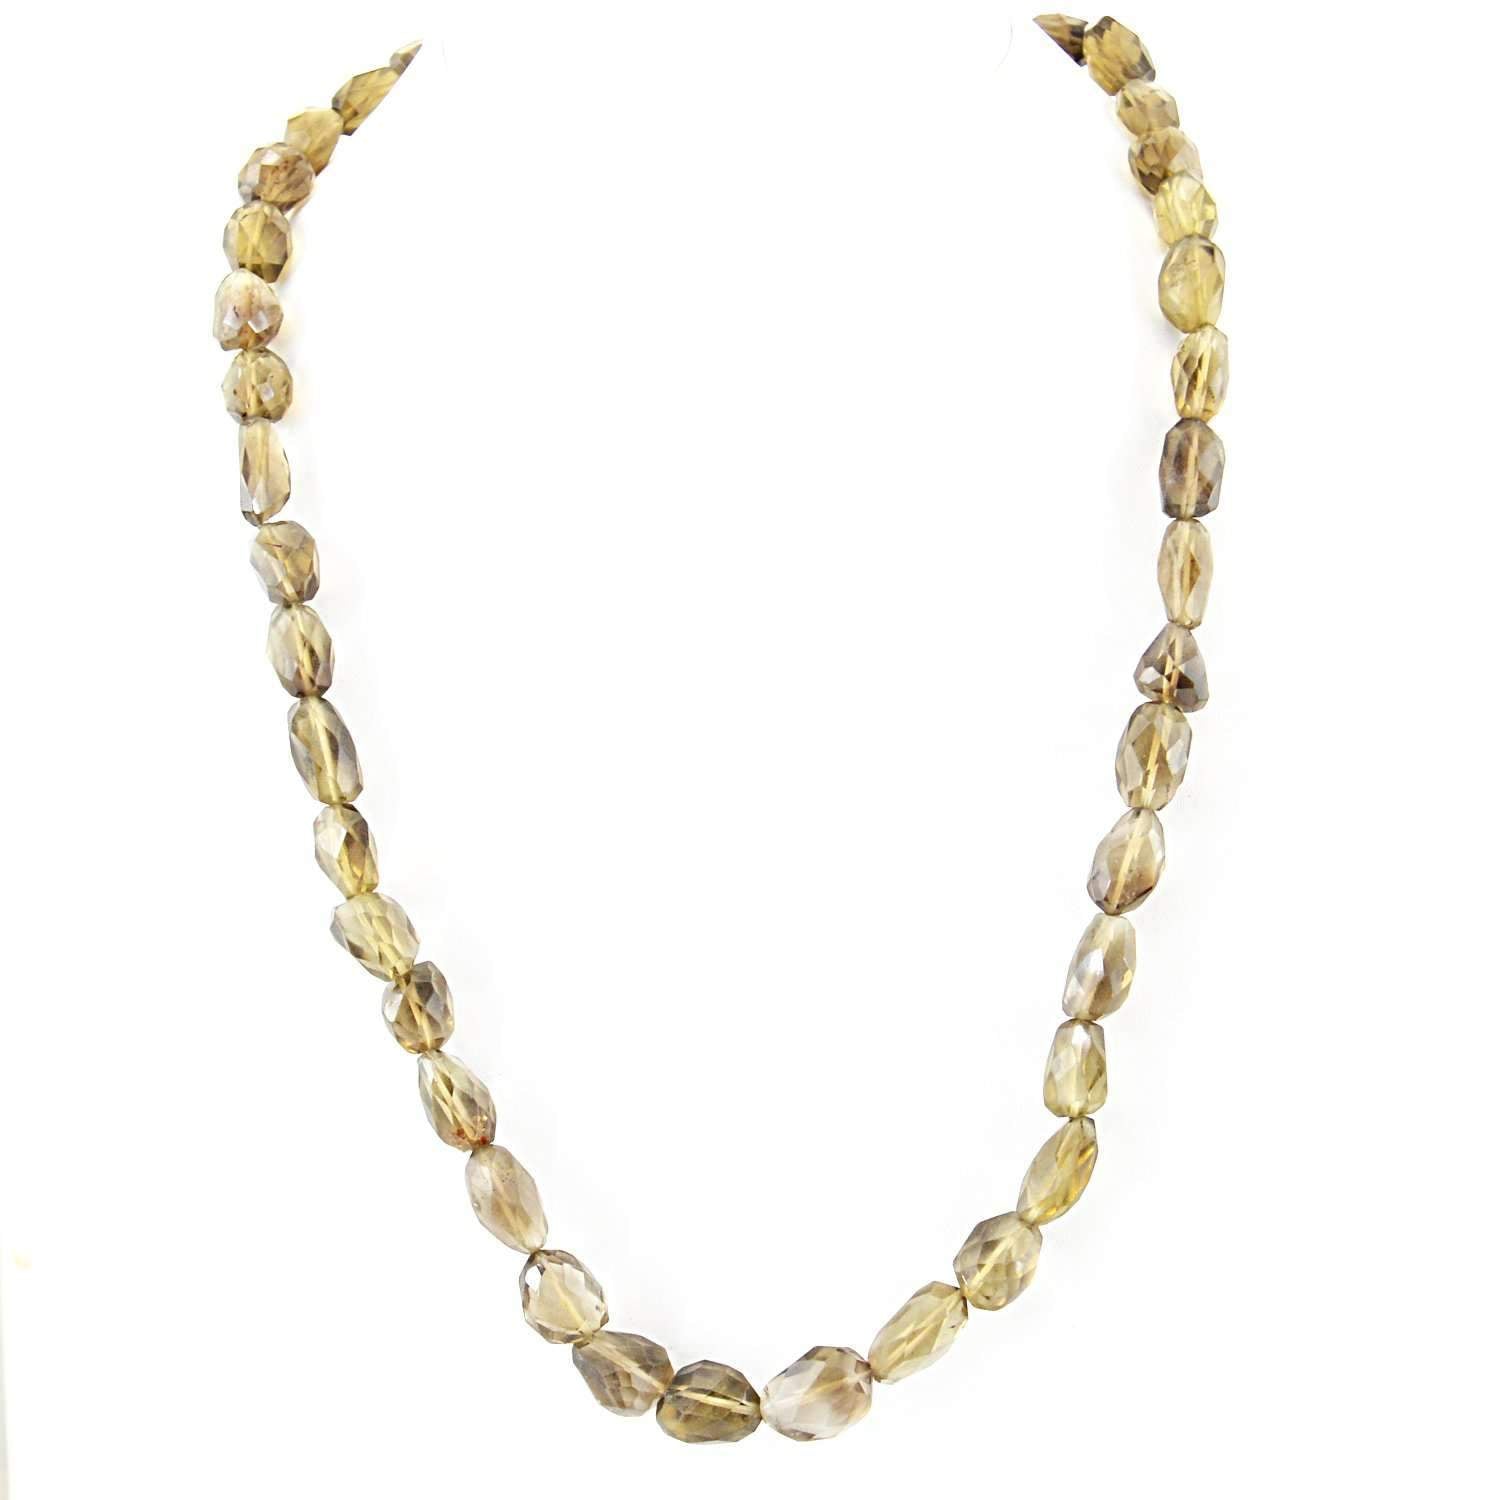 gemsmore:Smoky Quartz Necklace Natural 20 Inches Long Faceted Beads